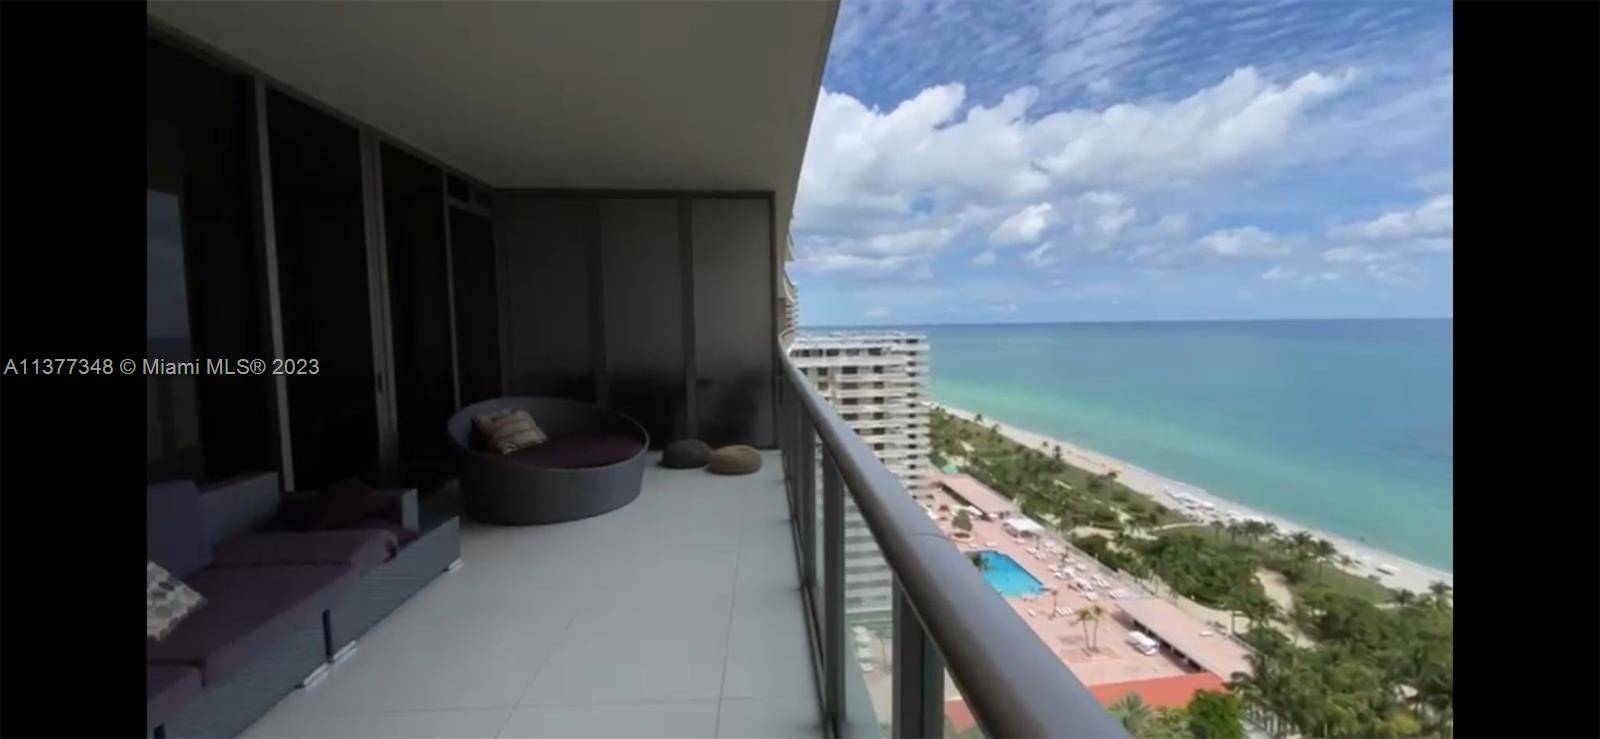 furnished, 2 beds, 2 1 2 Baths with direct ocean view.